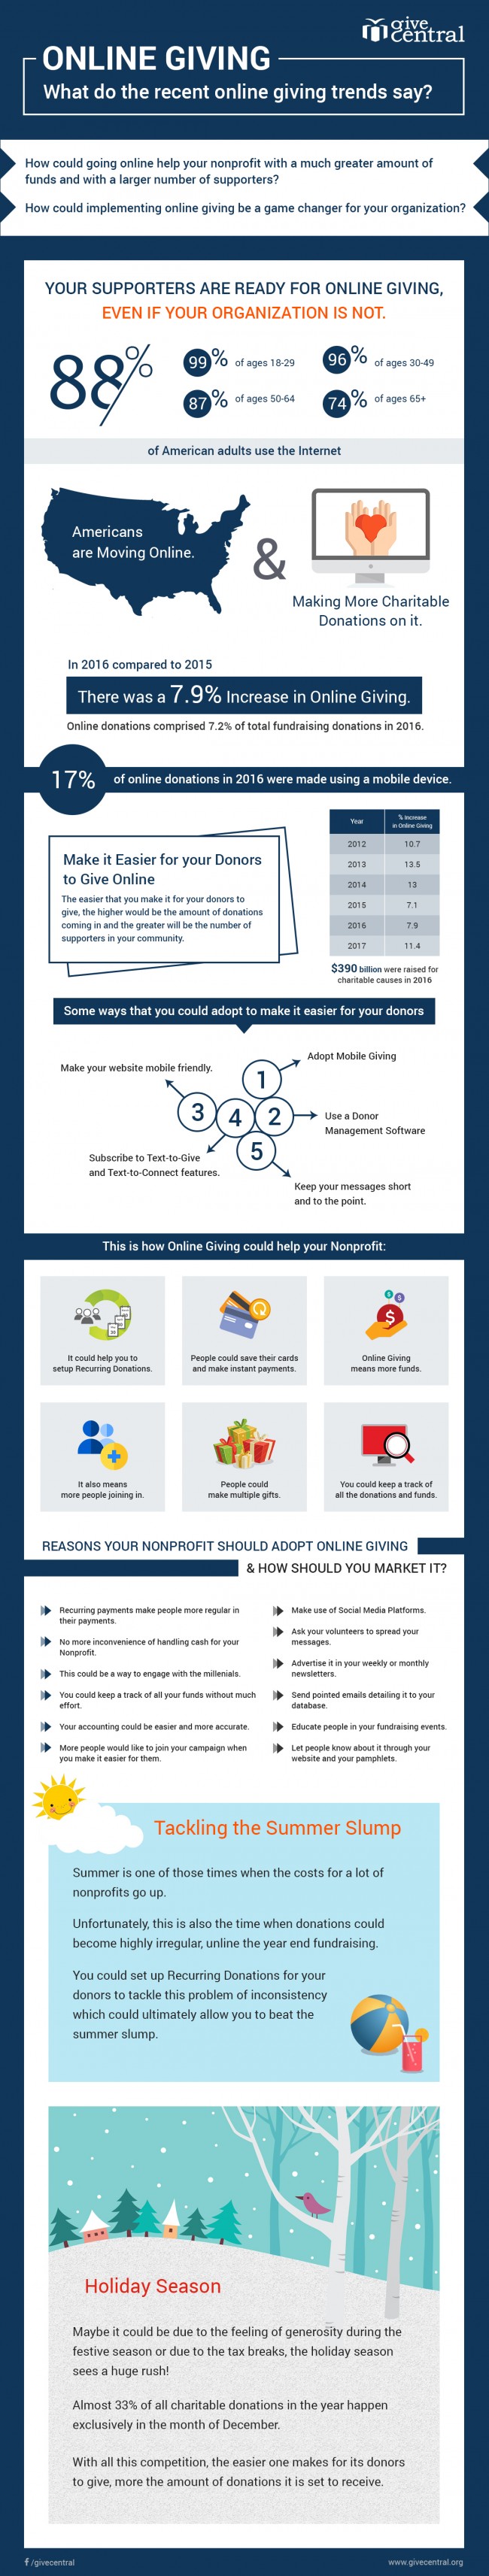 online giving infographic 